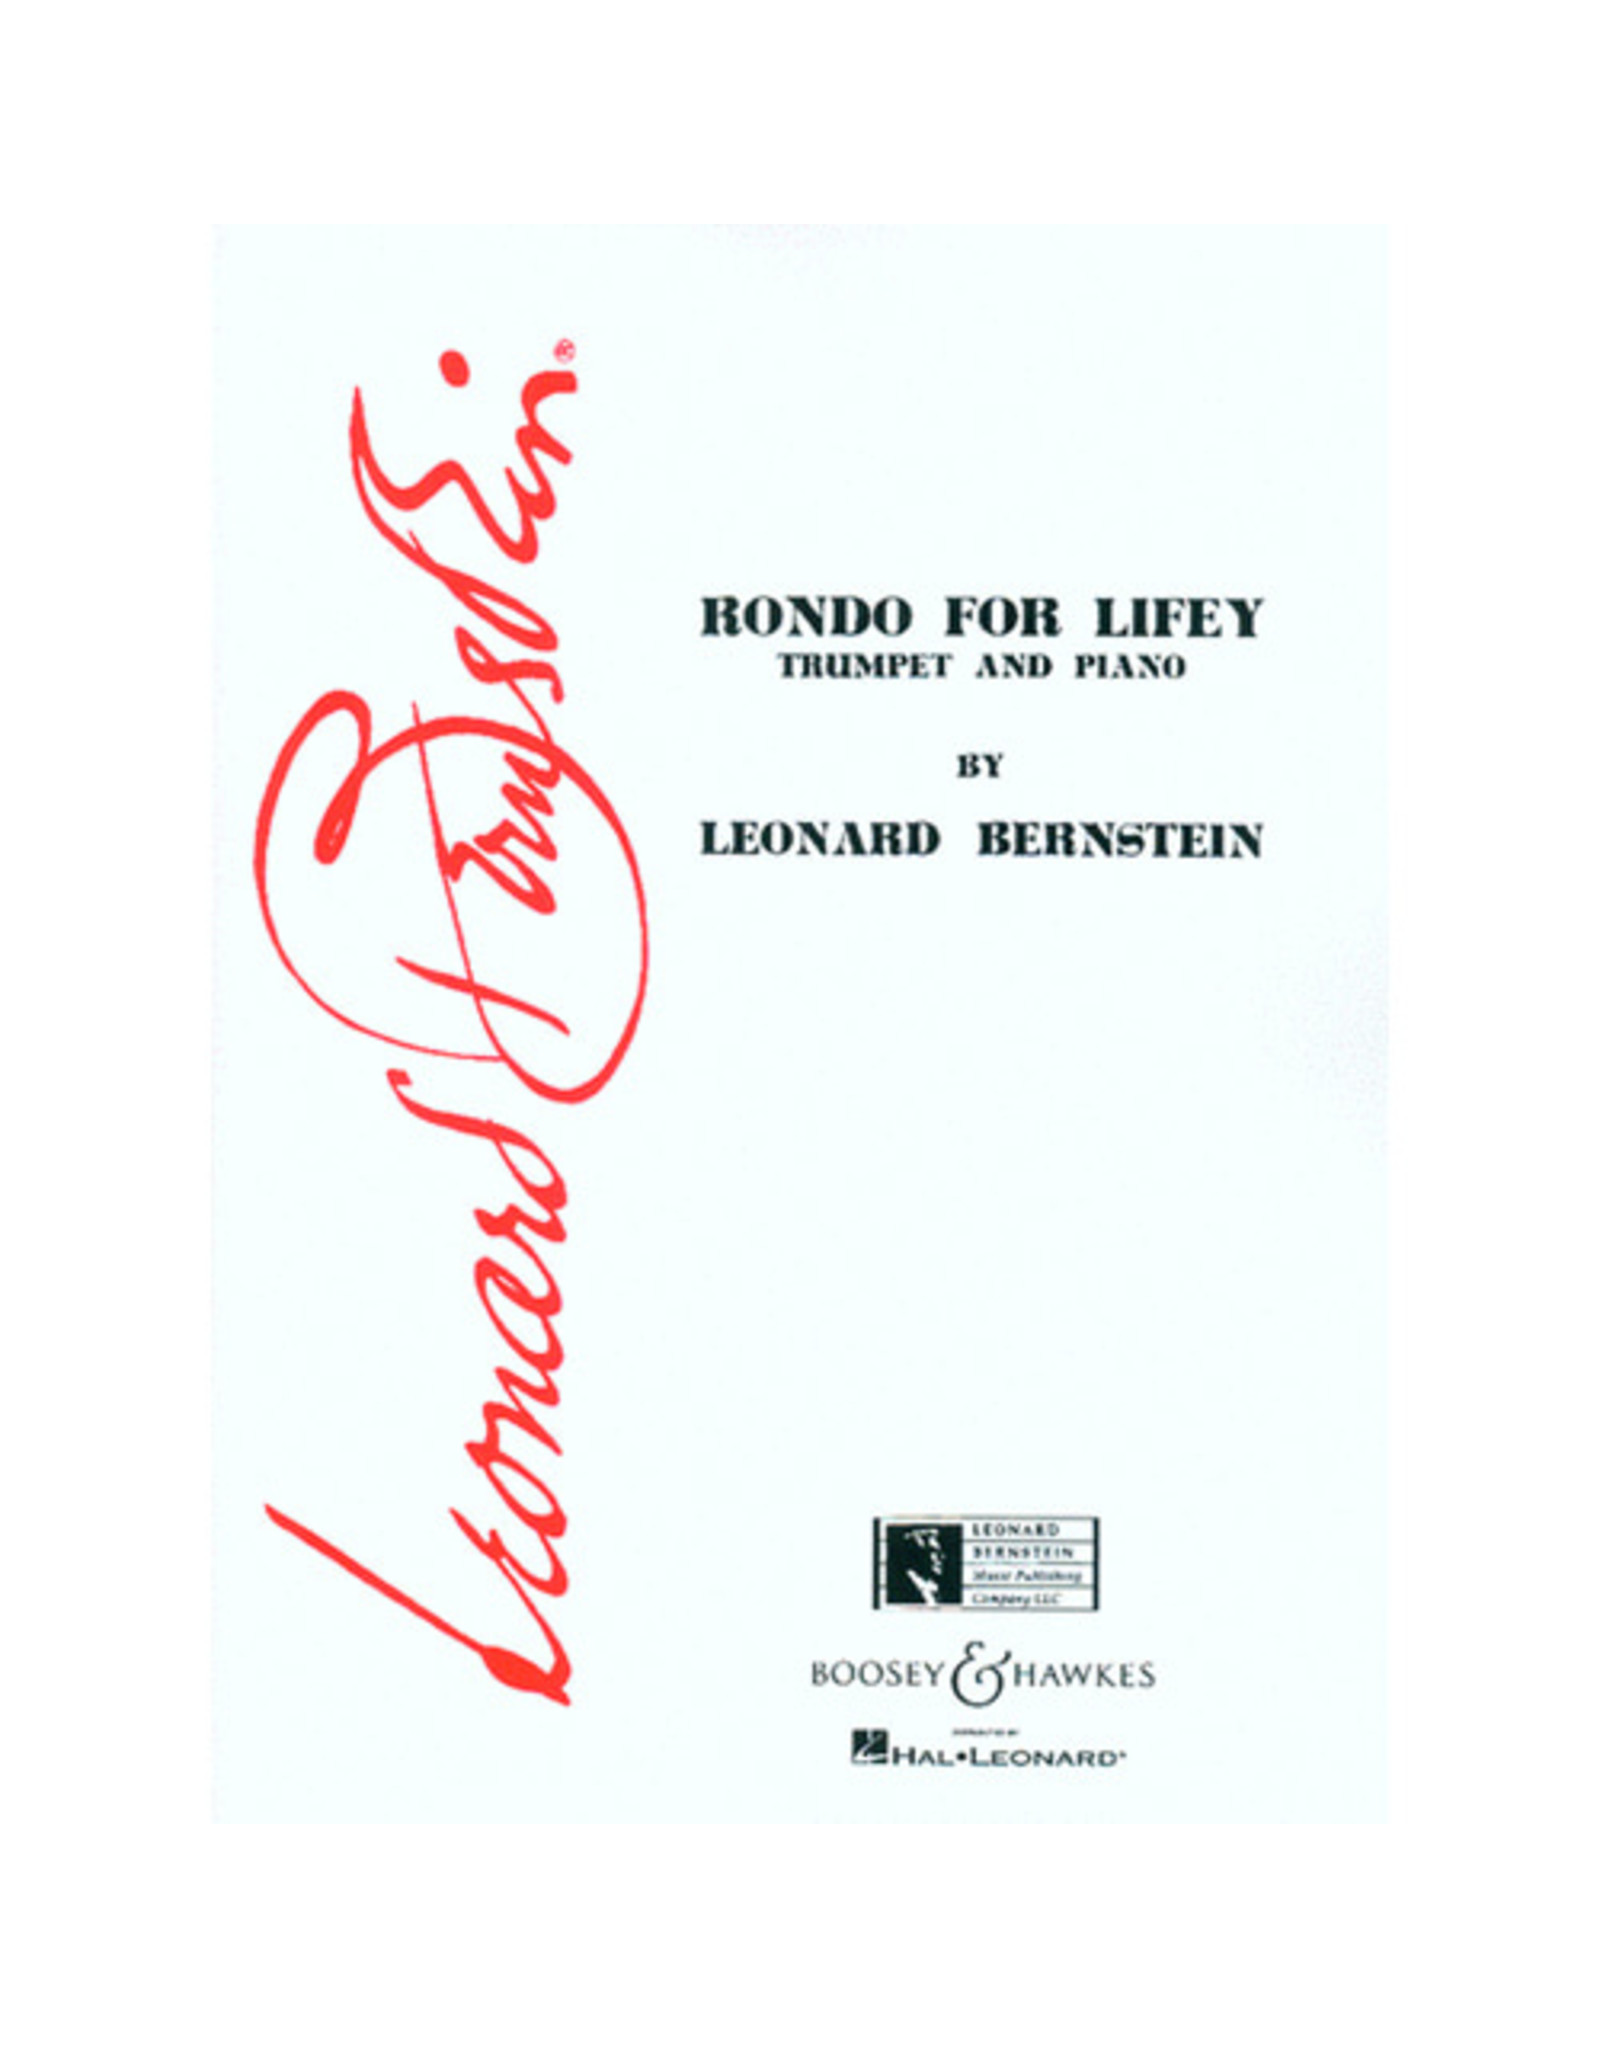 Hal Leonard Bernstein - Rondo for Lifey Trumpet and Piano Boosey & Hawkes Chamber Music